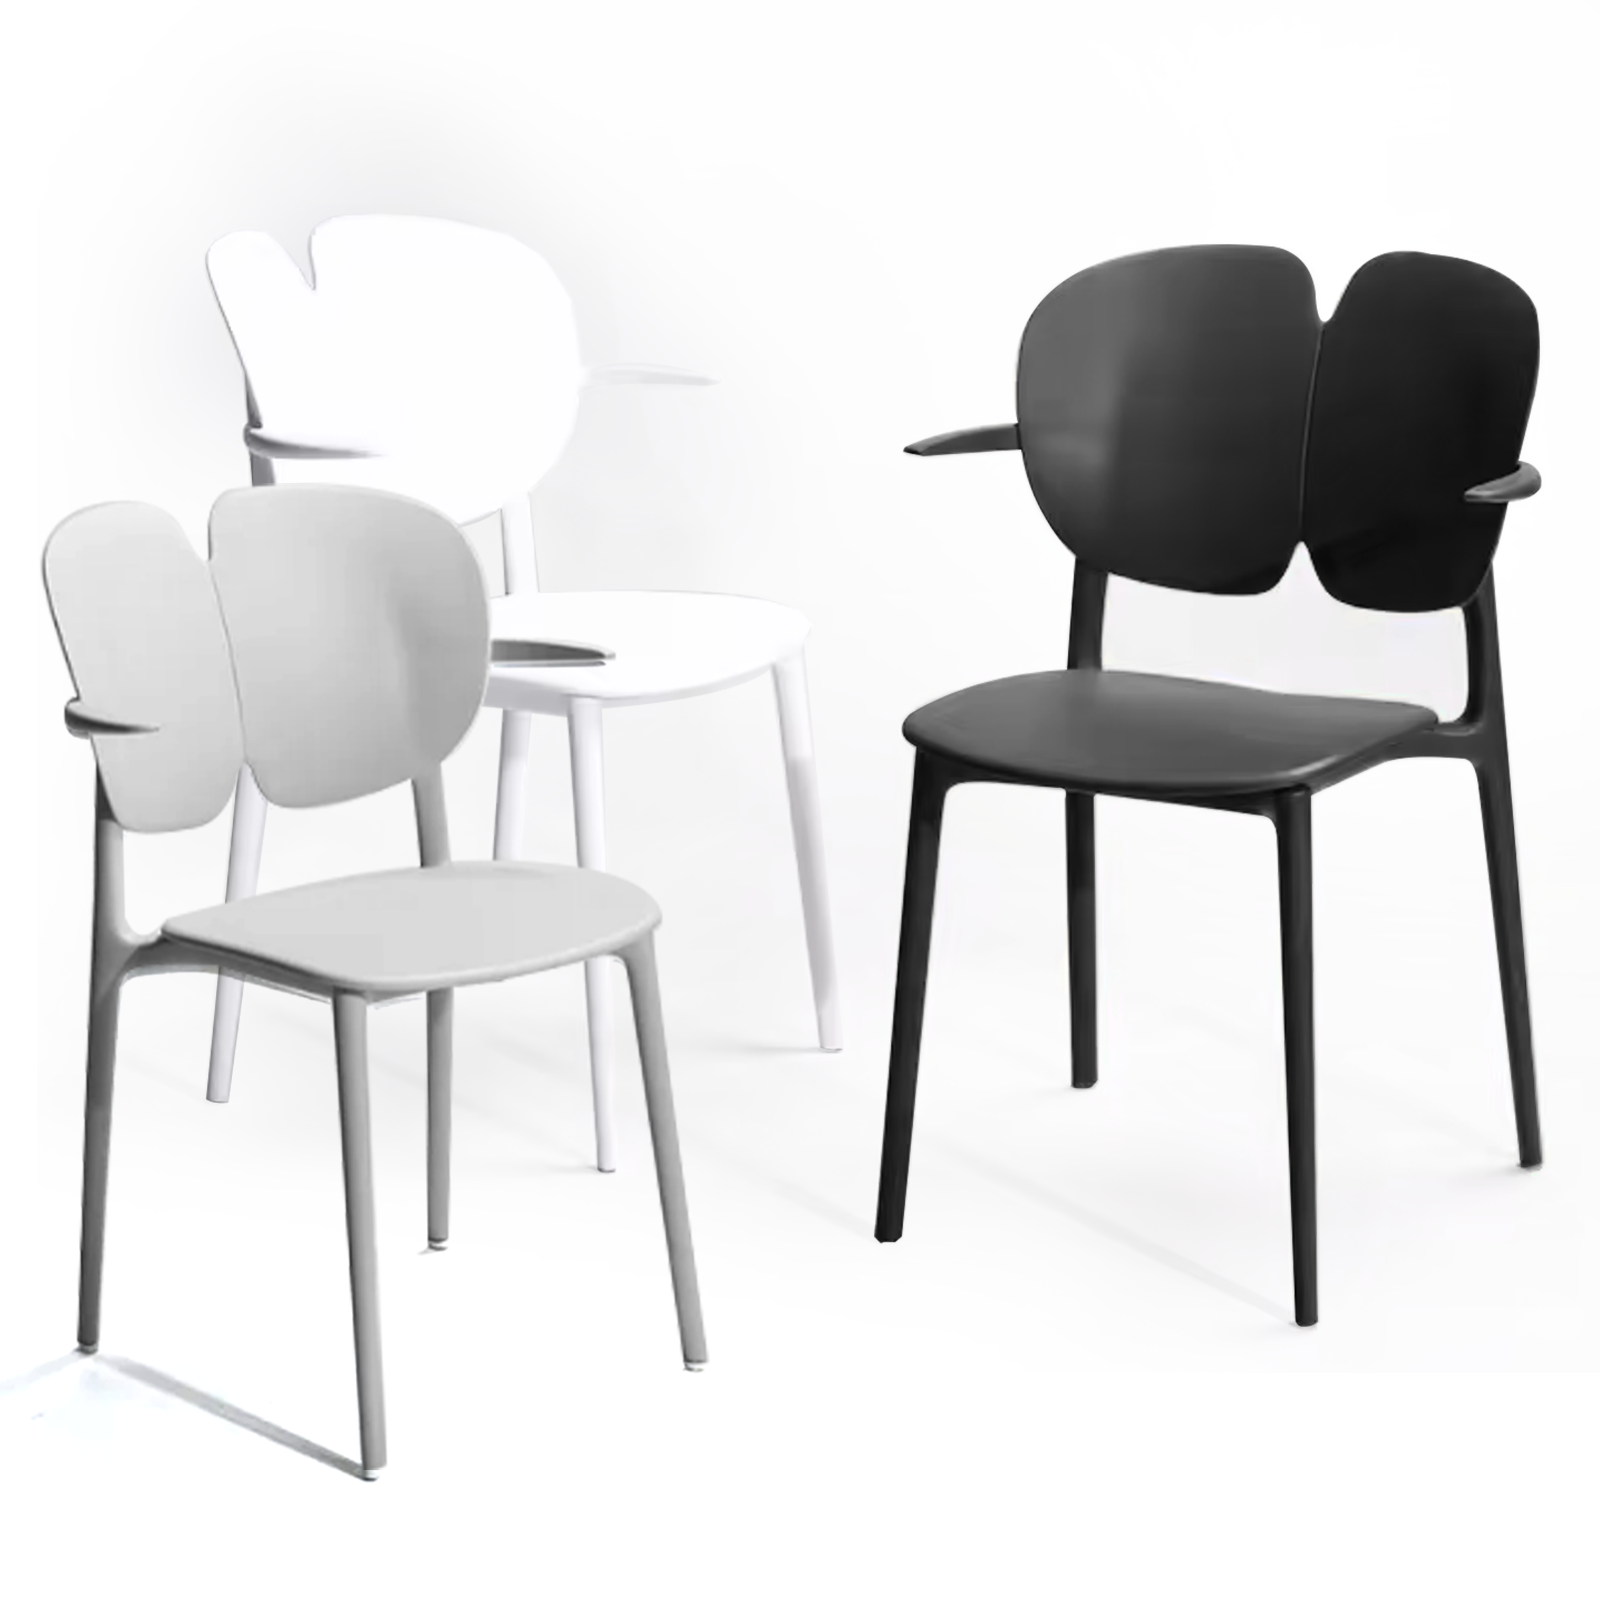 4 pcs Dining Chairs Kitchen Chair Plastic Stackable Modern Chairs Living Room - 3 Colours